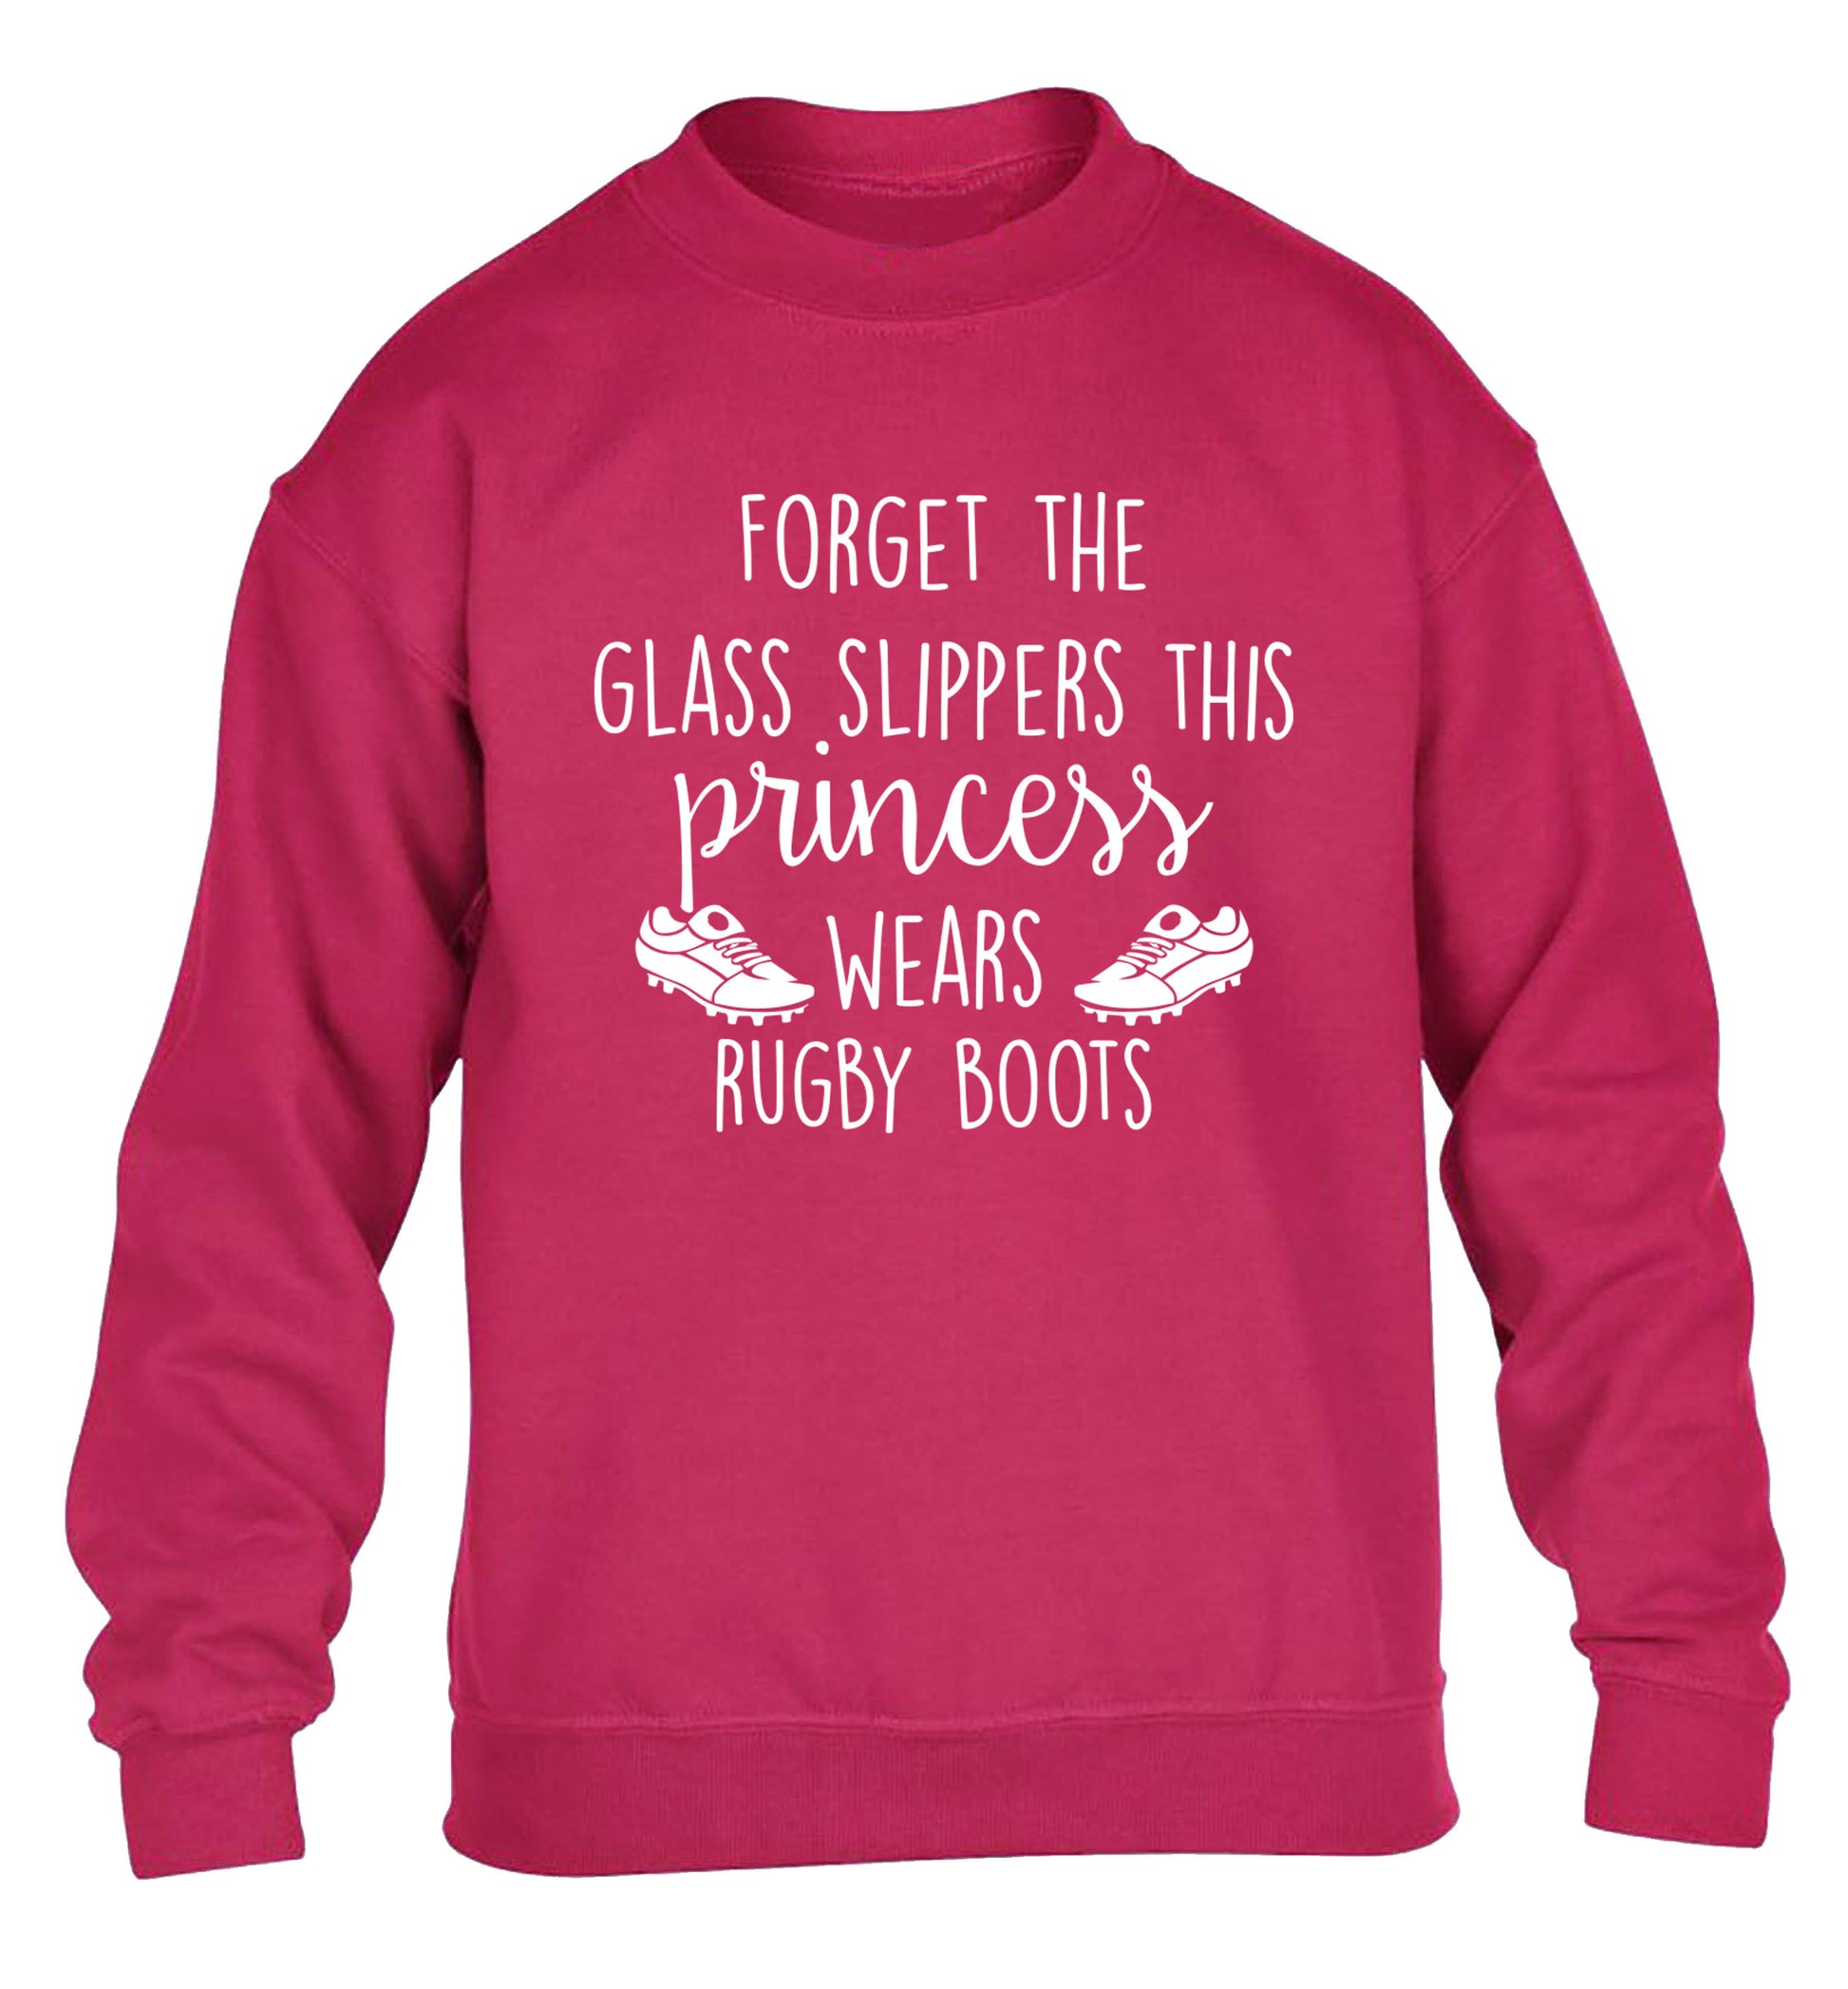 Forget the glass slippers this princess wears rugby boots children's pink sweater 12-14 Years